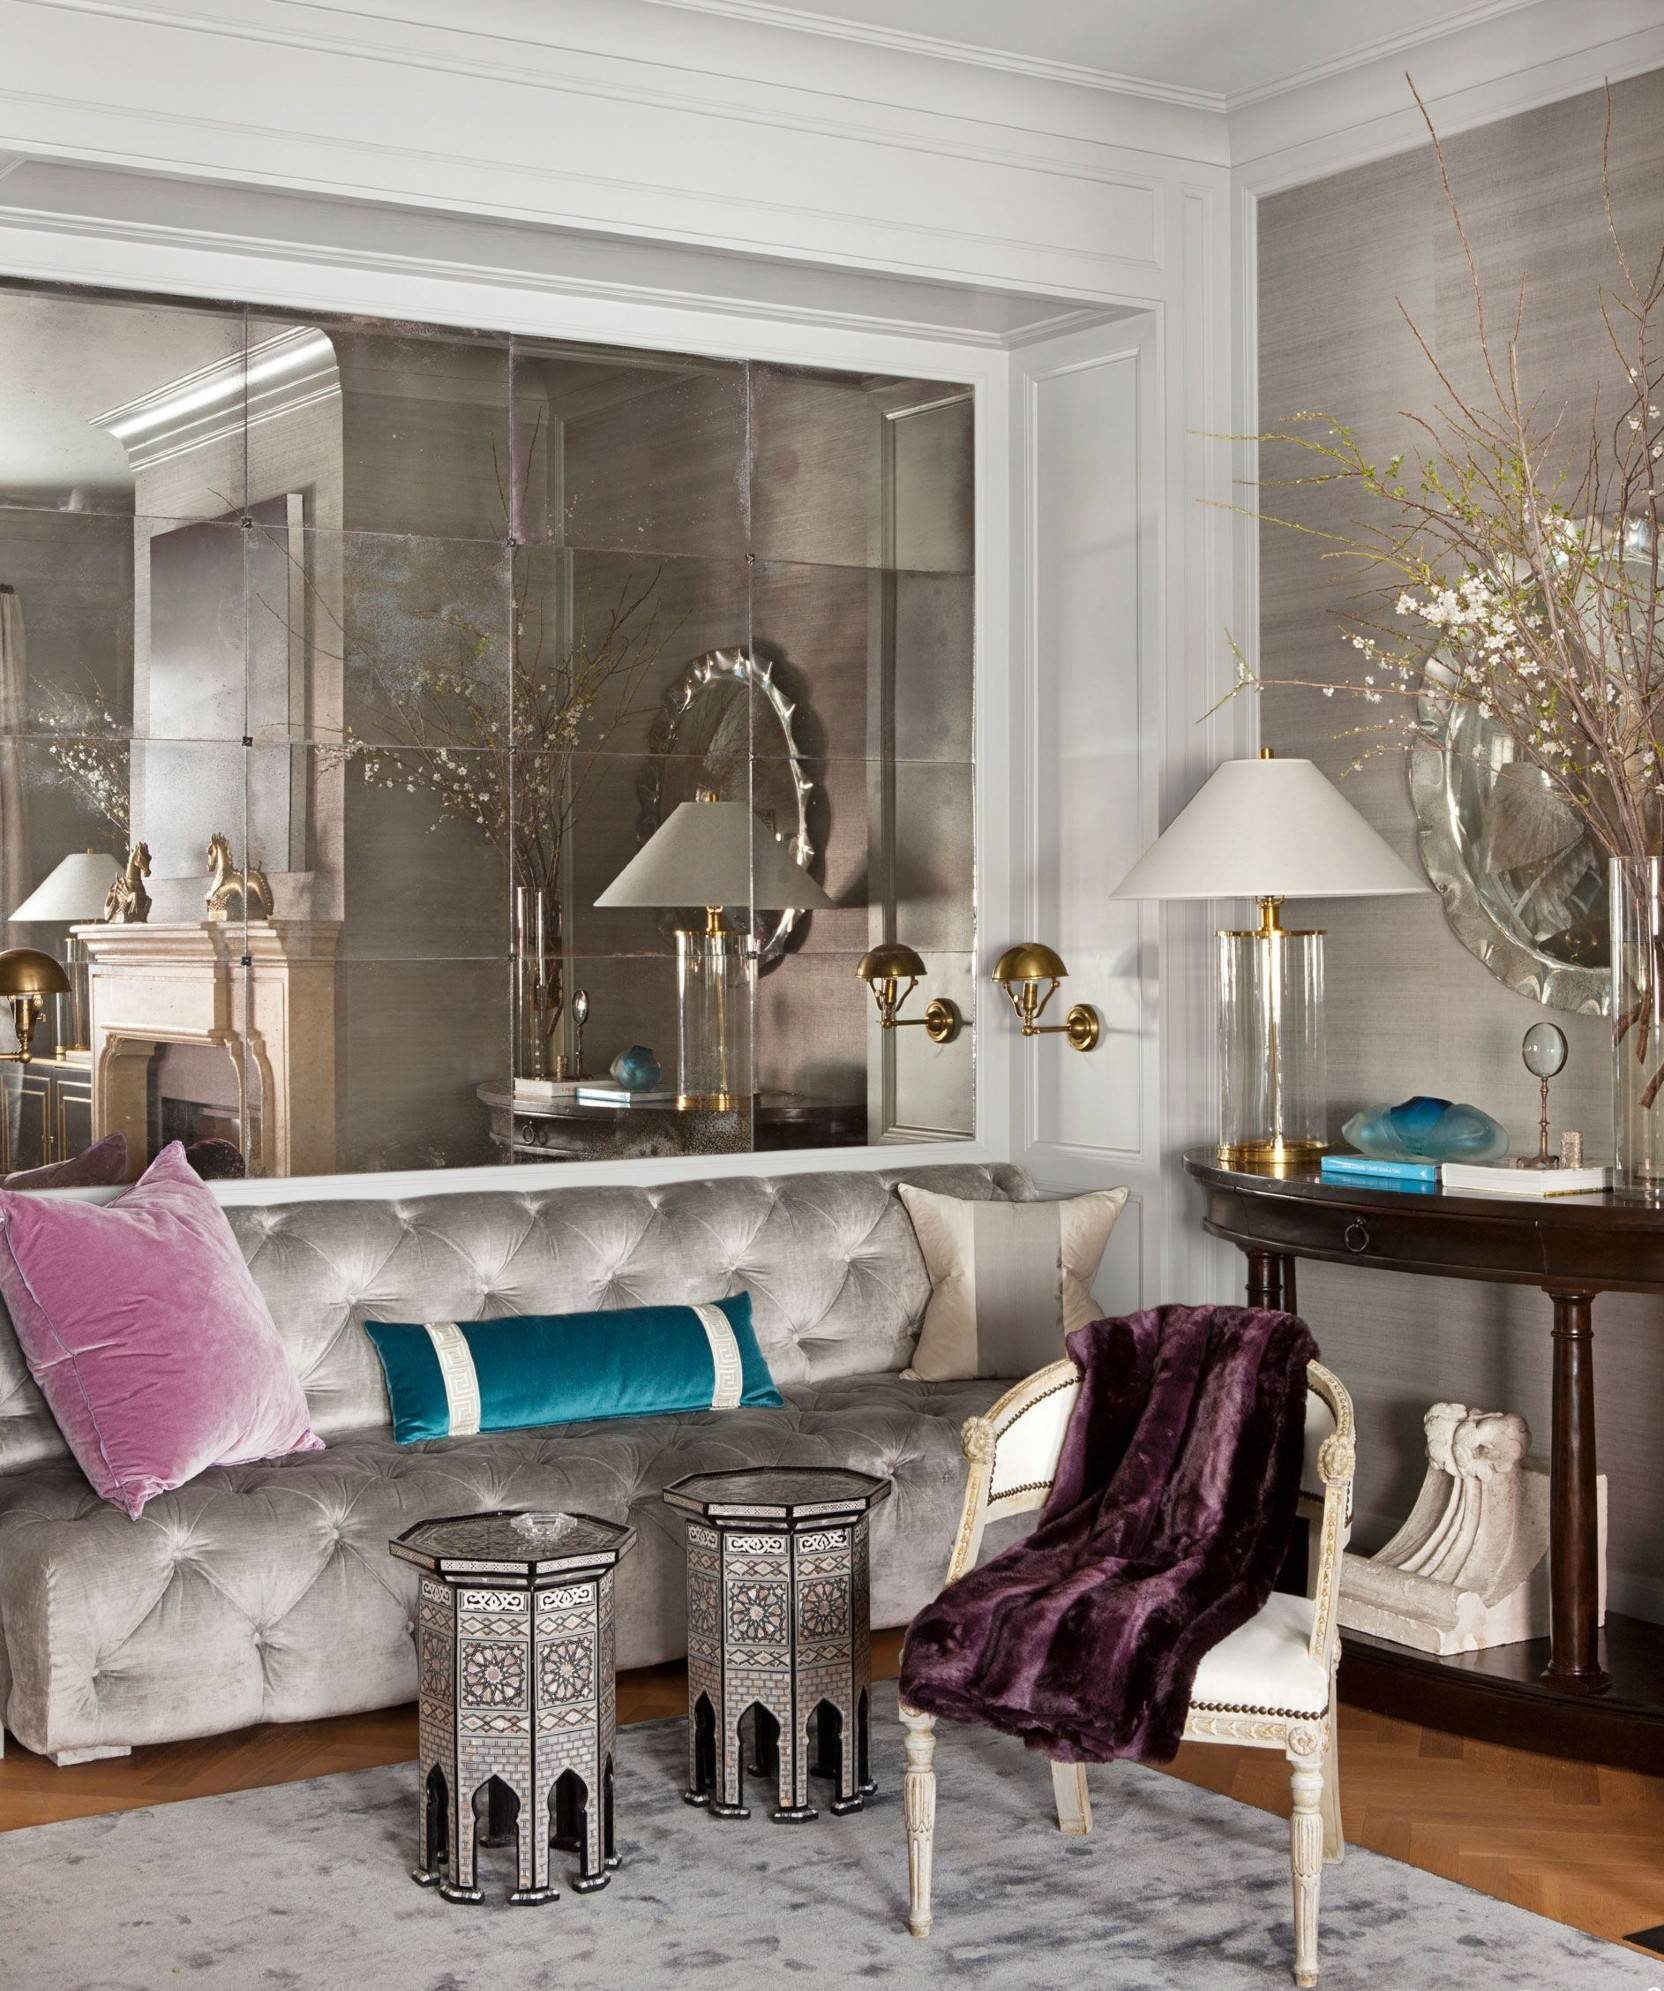 How to Decorate with Mirrors in Your Home